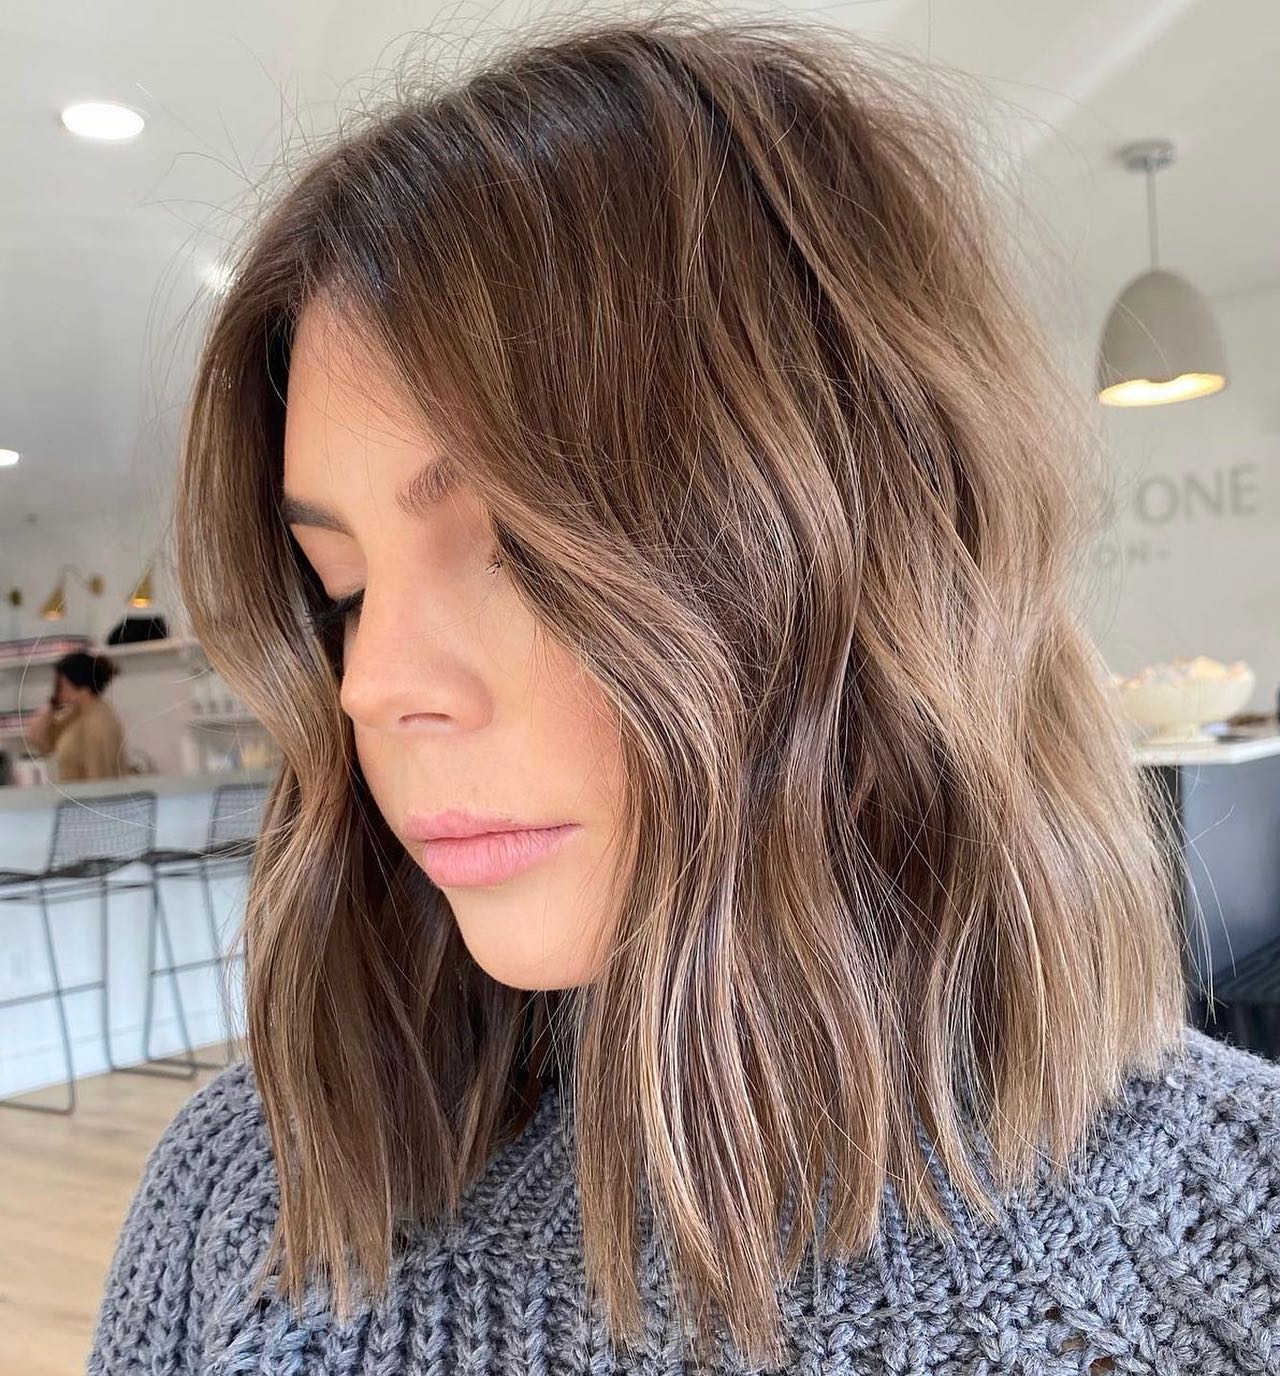 Shoulder Length Hairstyle 75 Below shoulder length haircuts | Short to mid length hairstyles | Shoulder length haircuts for thick hair Shoulder Length Hairstyles for Women